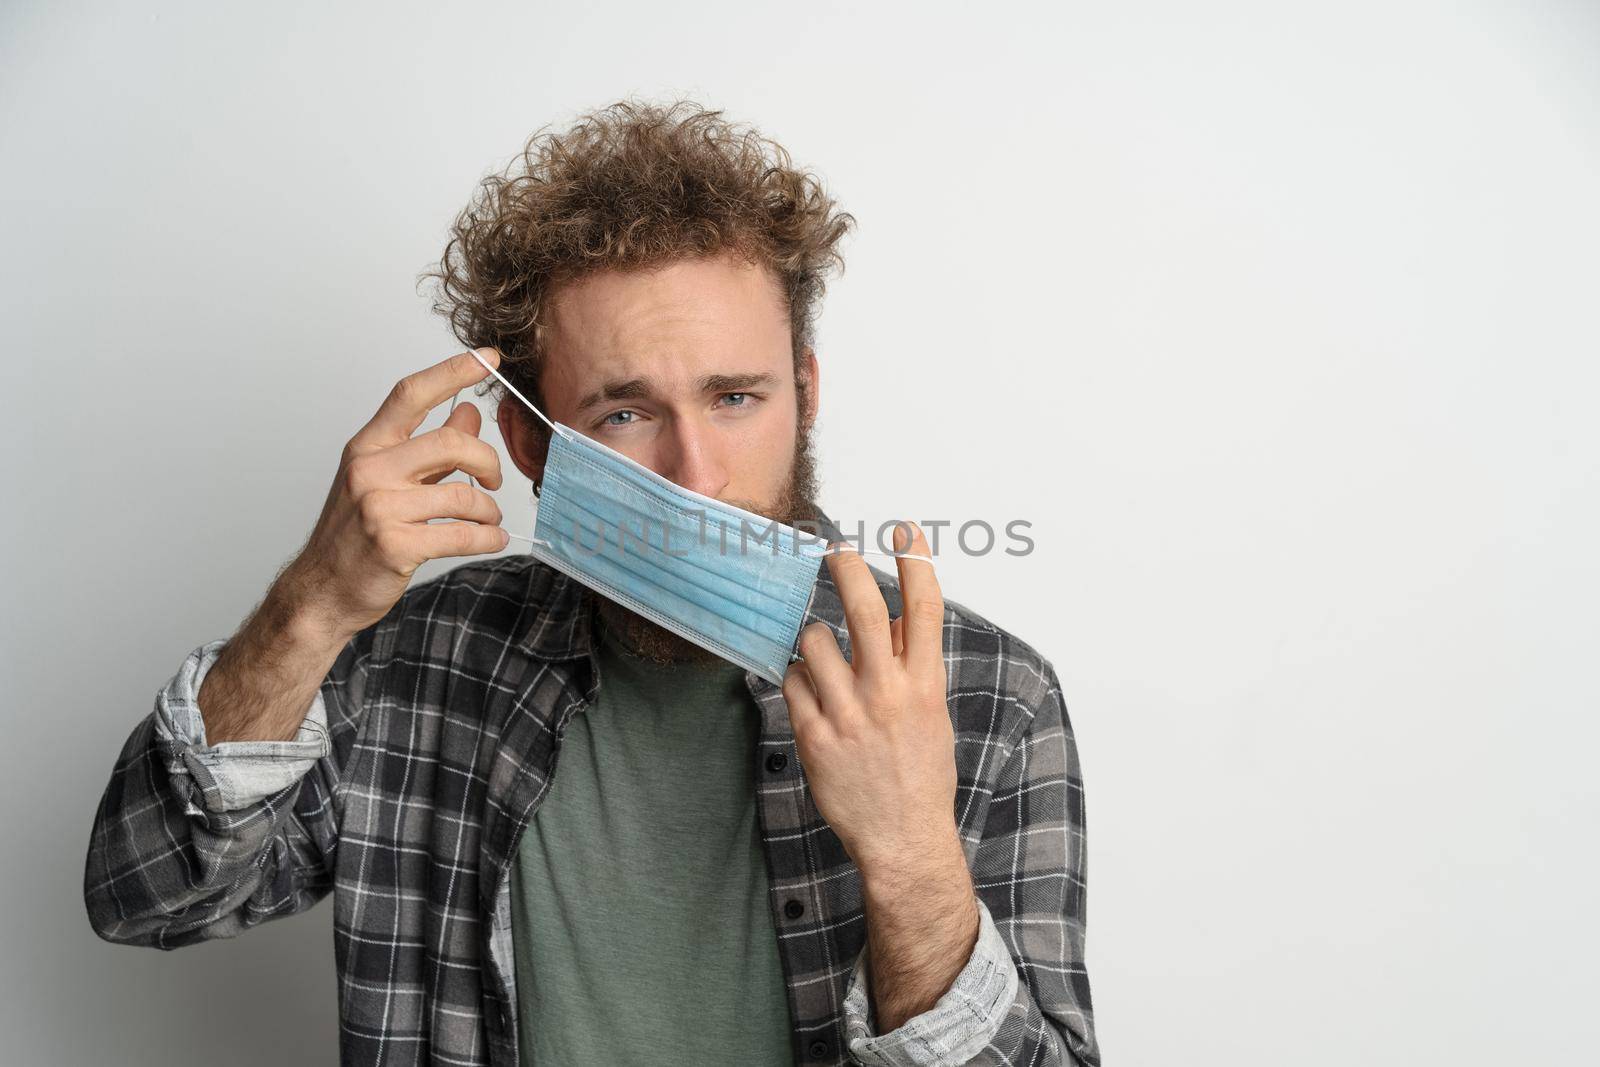 Young man holding protective sterile medical mask in front of face to protect coronavirus, with curly hair, wearing plaid shirt and olive t-shirt under. White background.